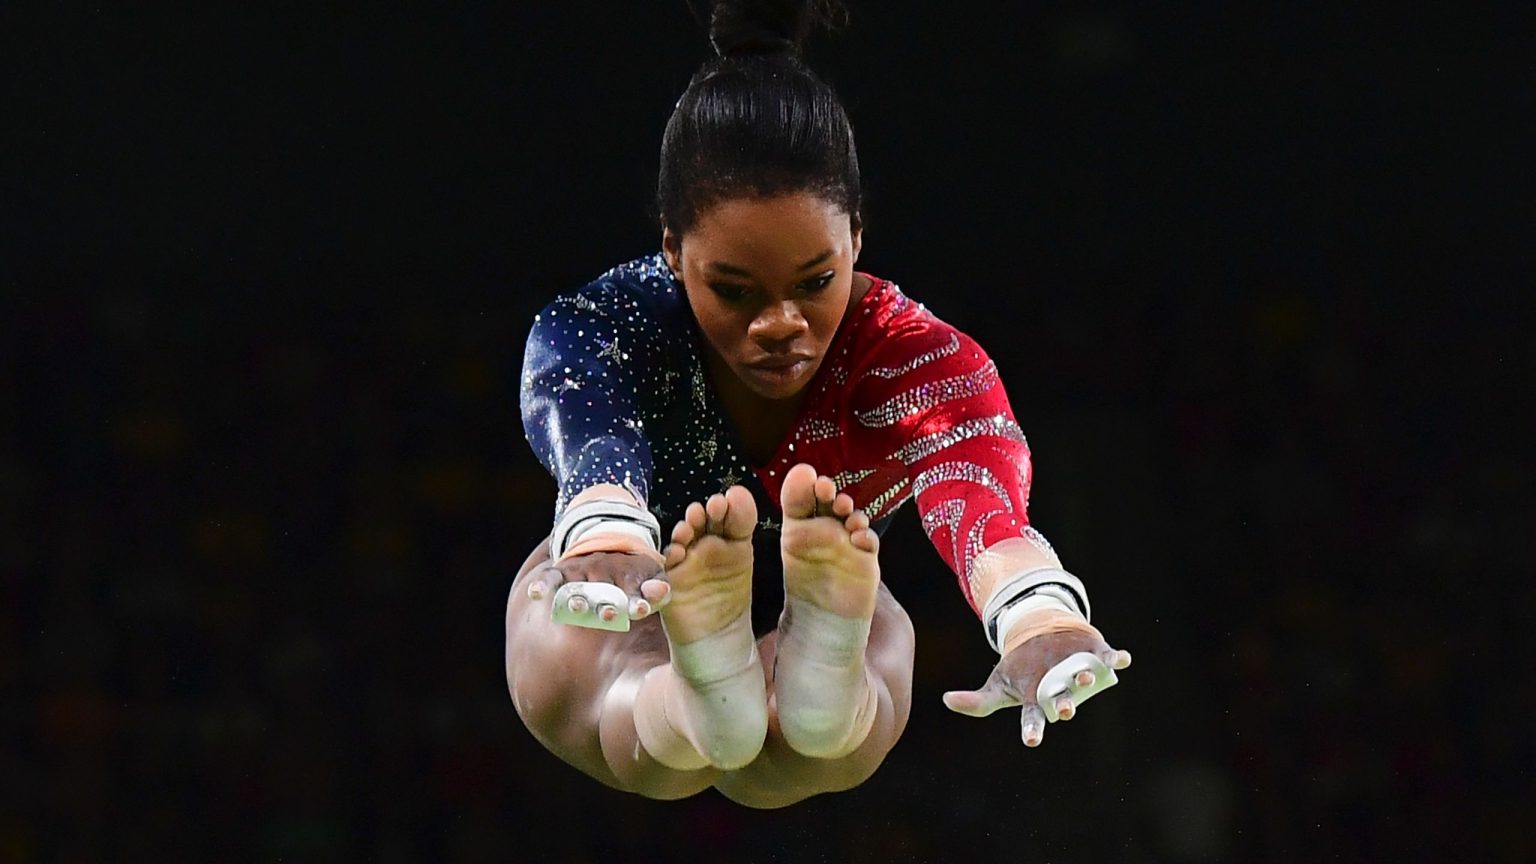 What is Gabby known for? What's Gabby Douglas doing now? ABTC